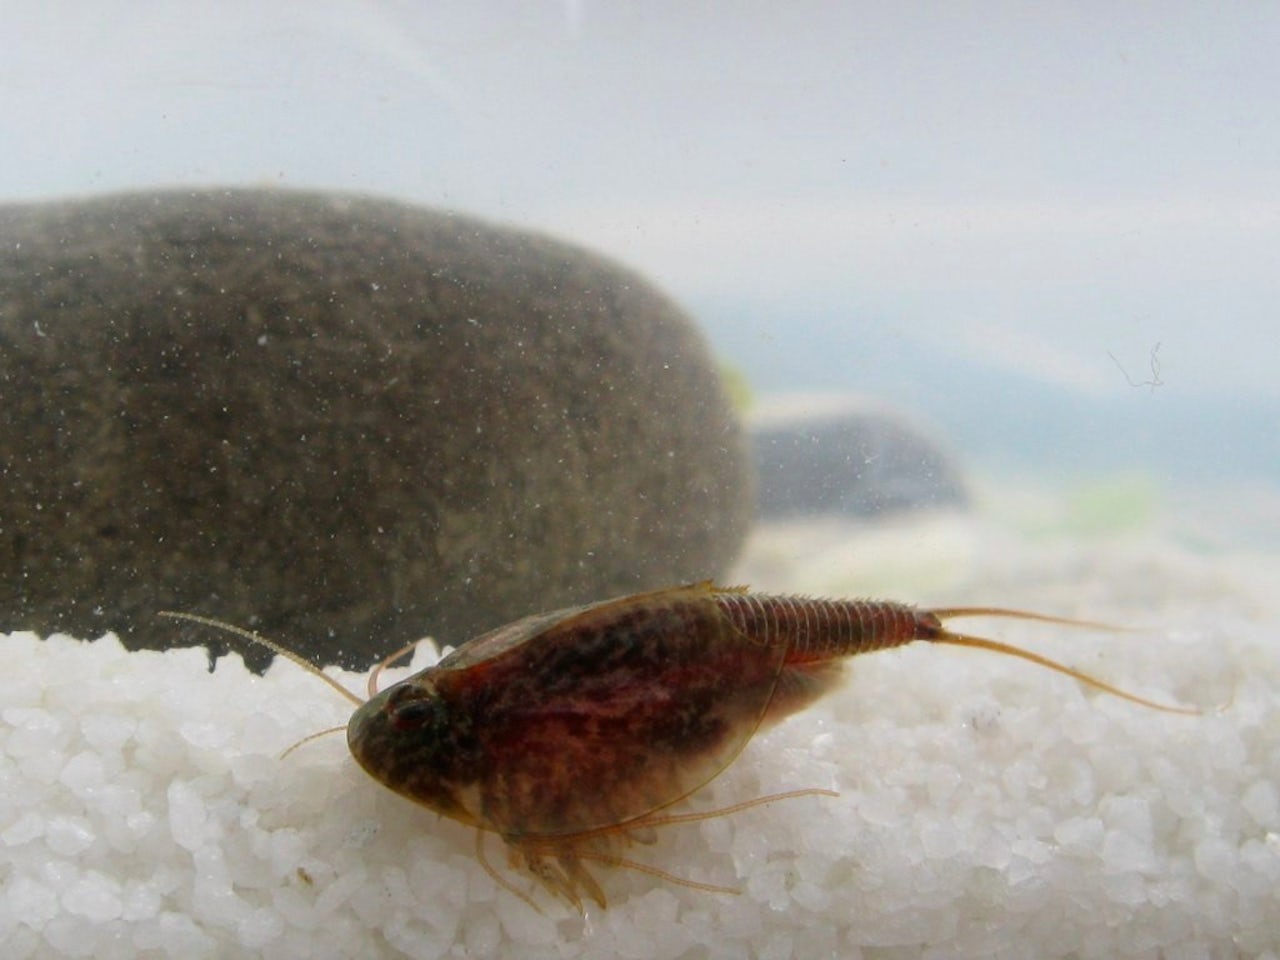 Triops ultimate kit! 3 packets of eggs, 3 different species